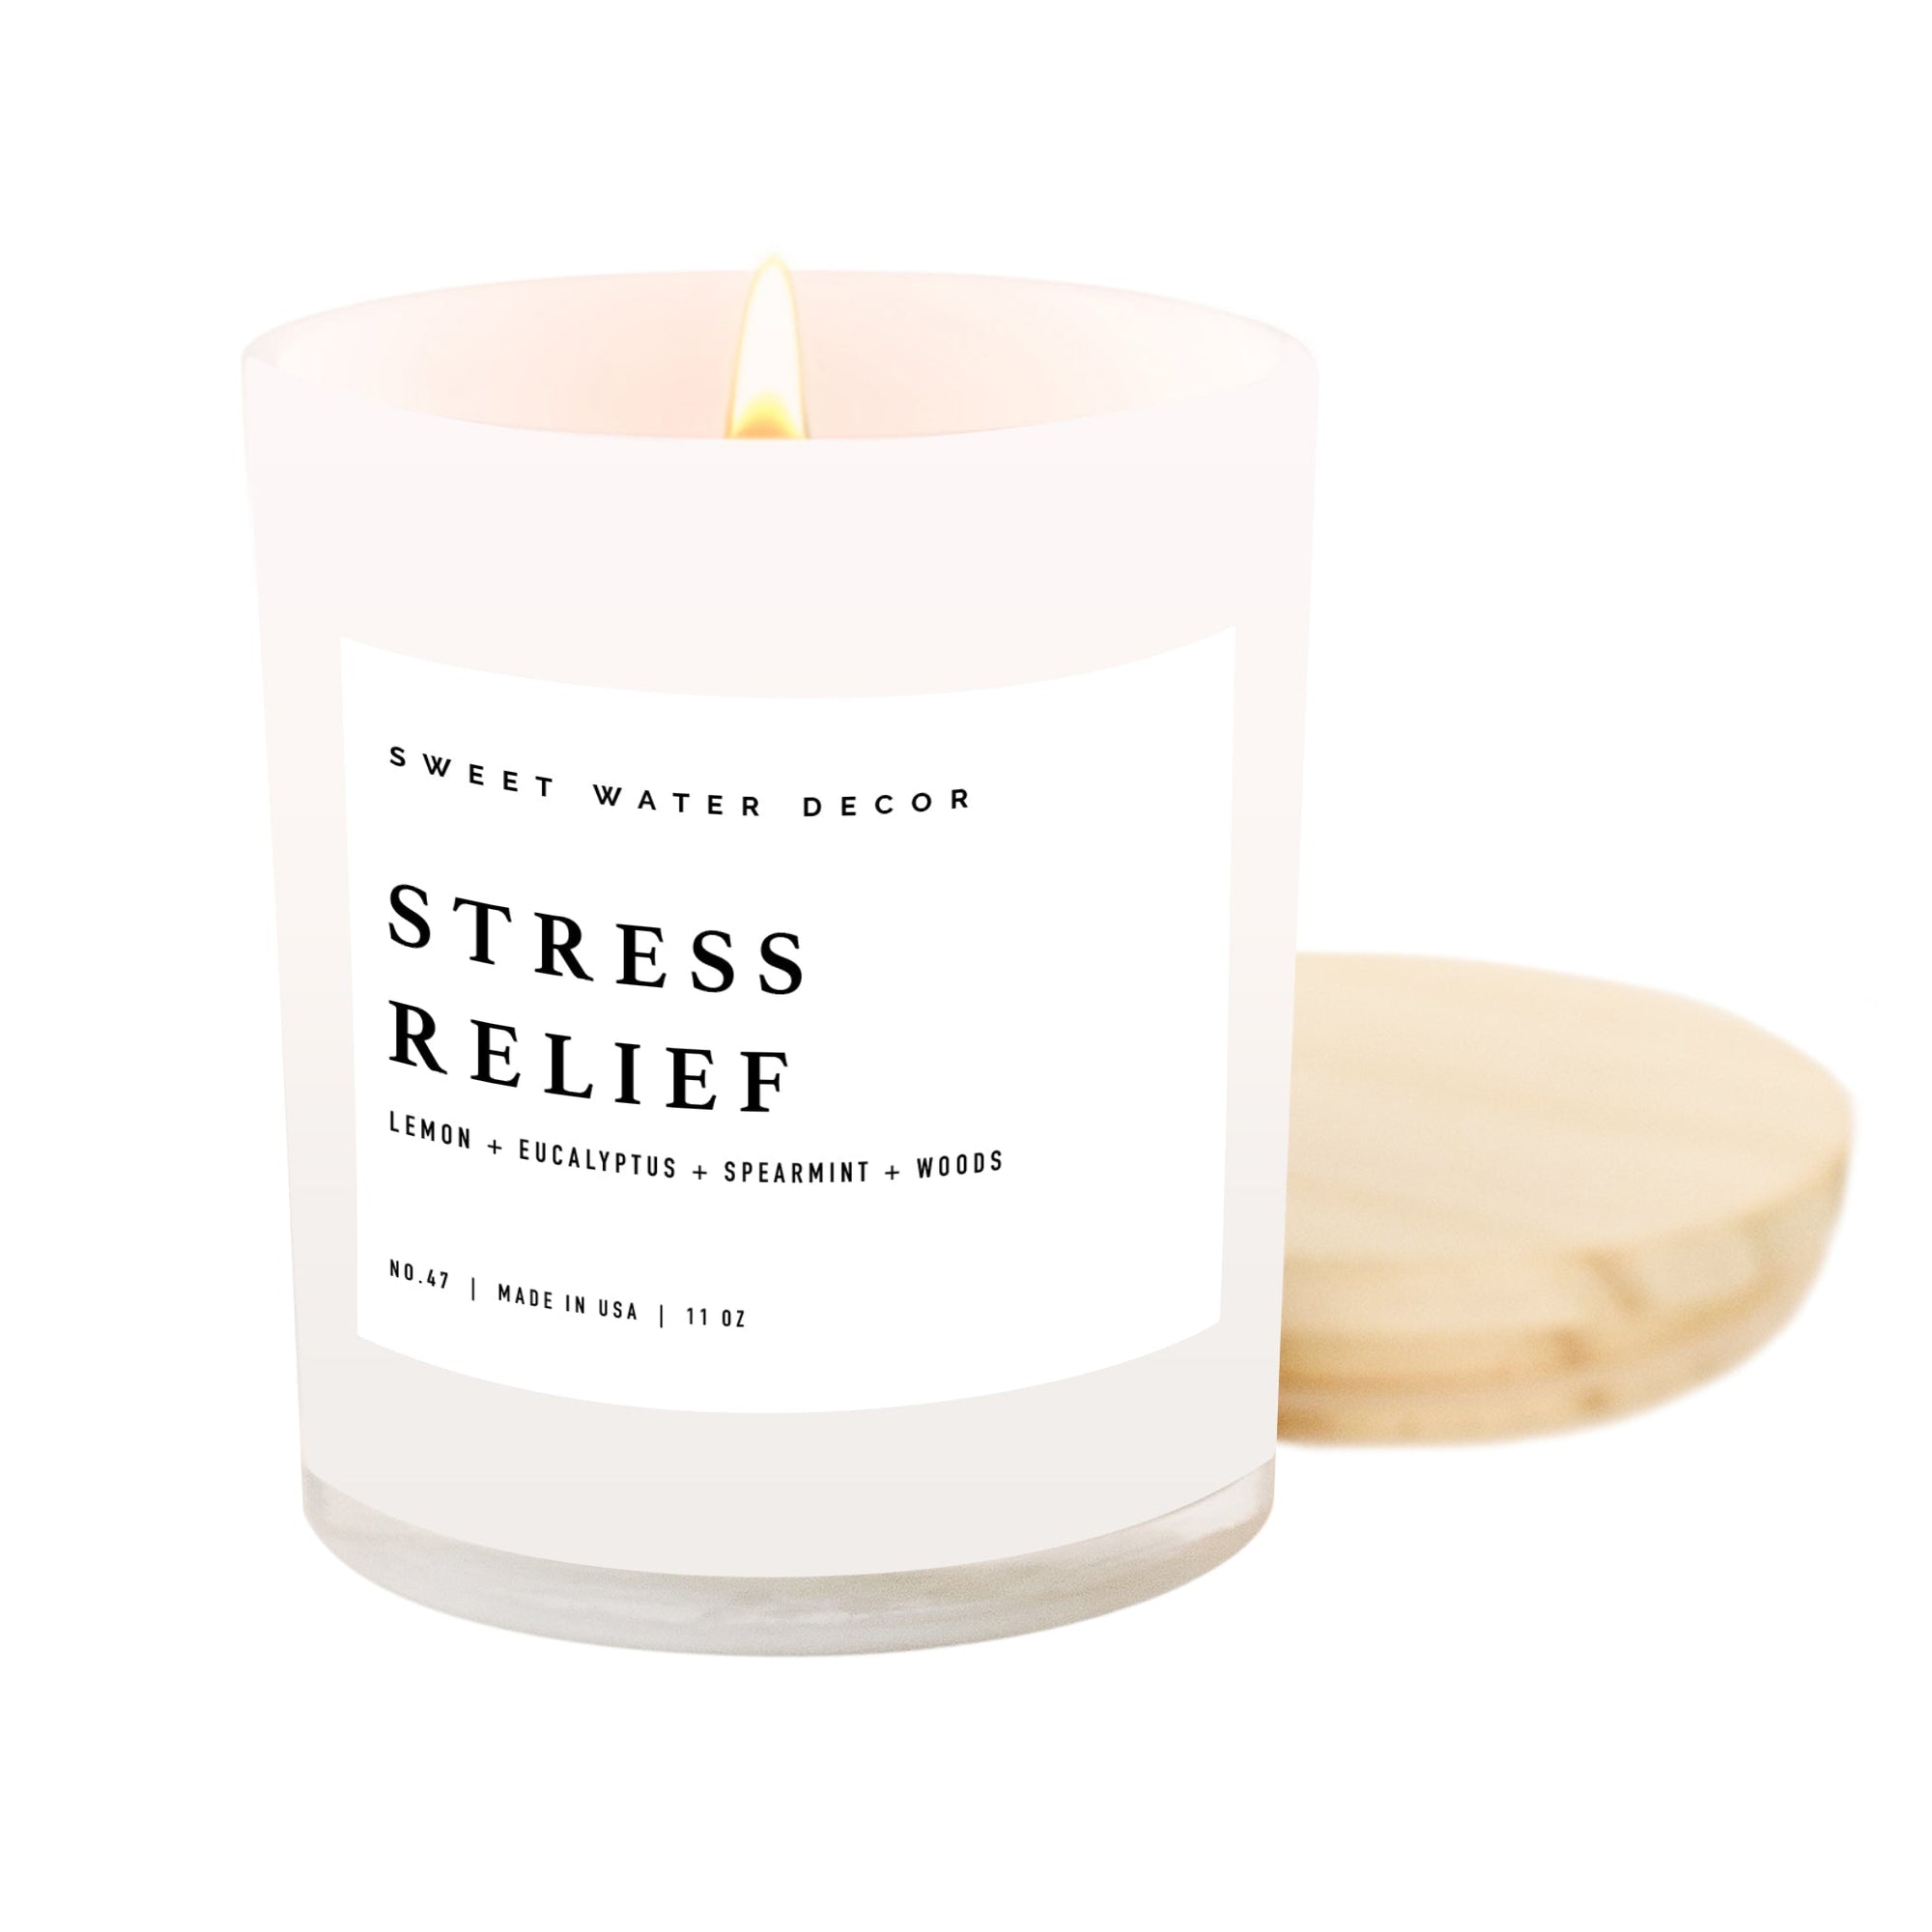 Stress Relief White Jar Candle